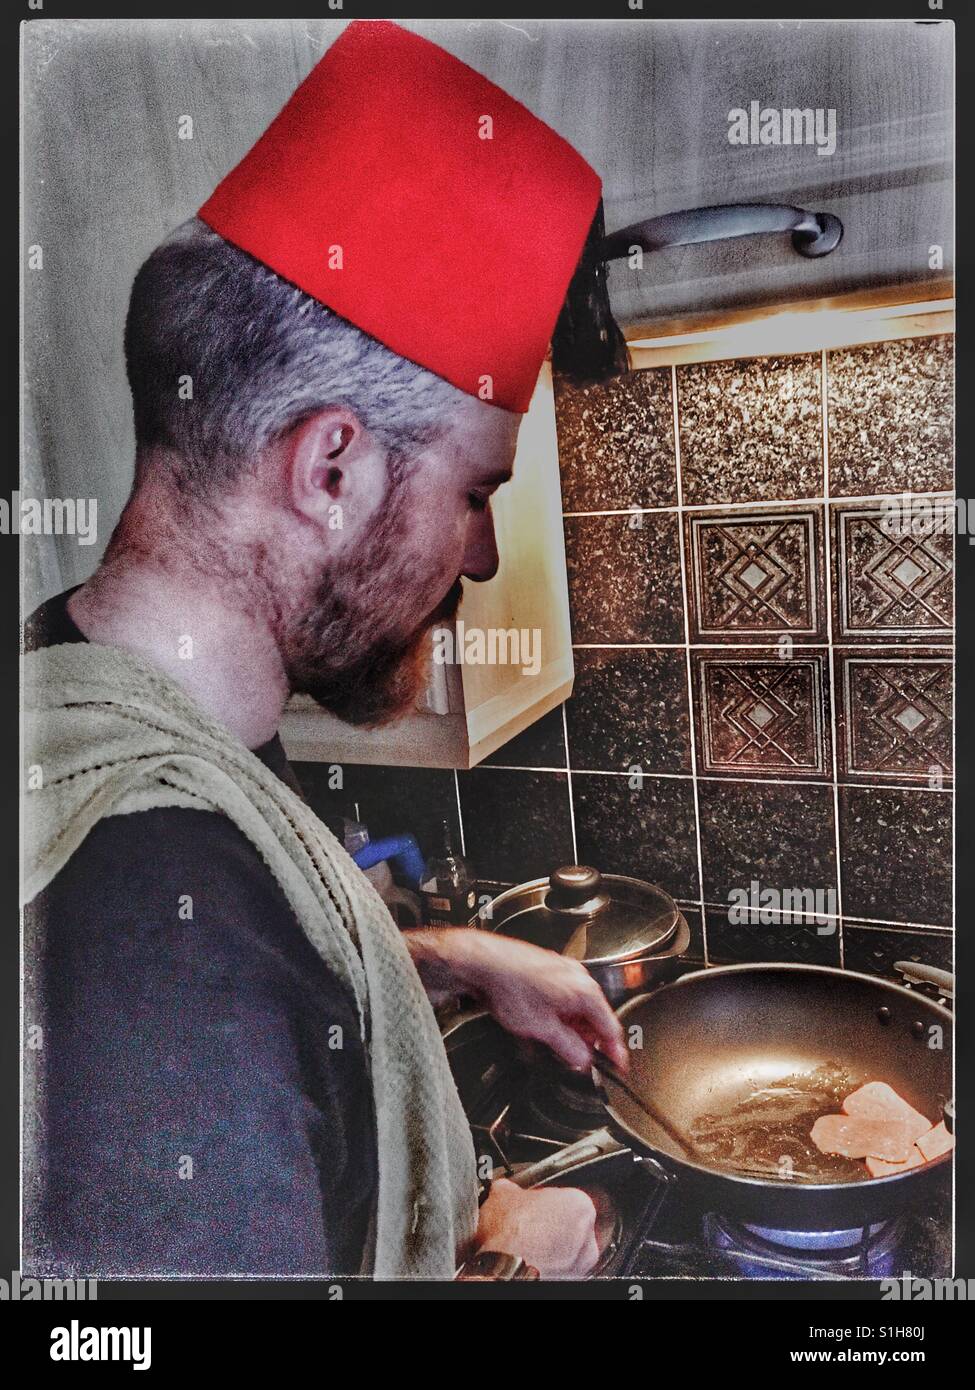 Man in Fez cooking. Stock Photo